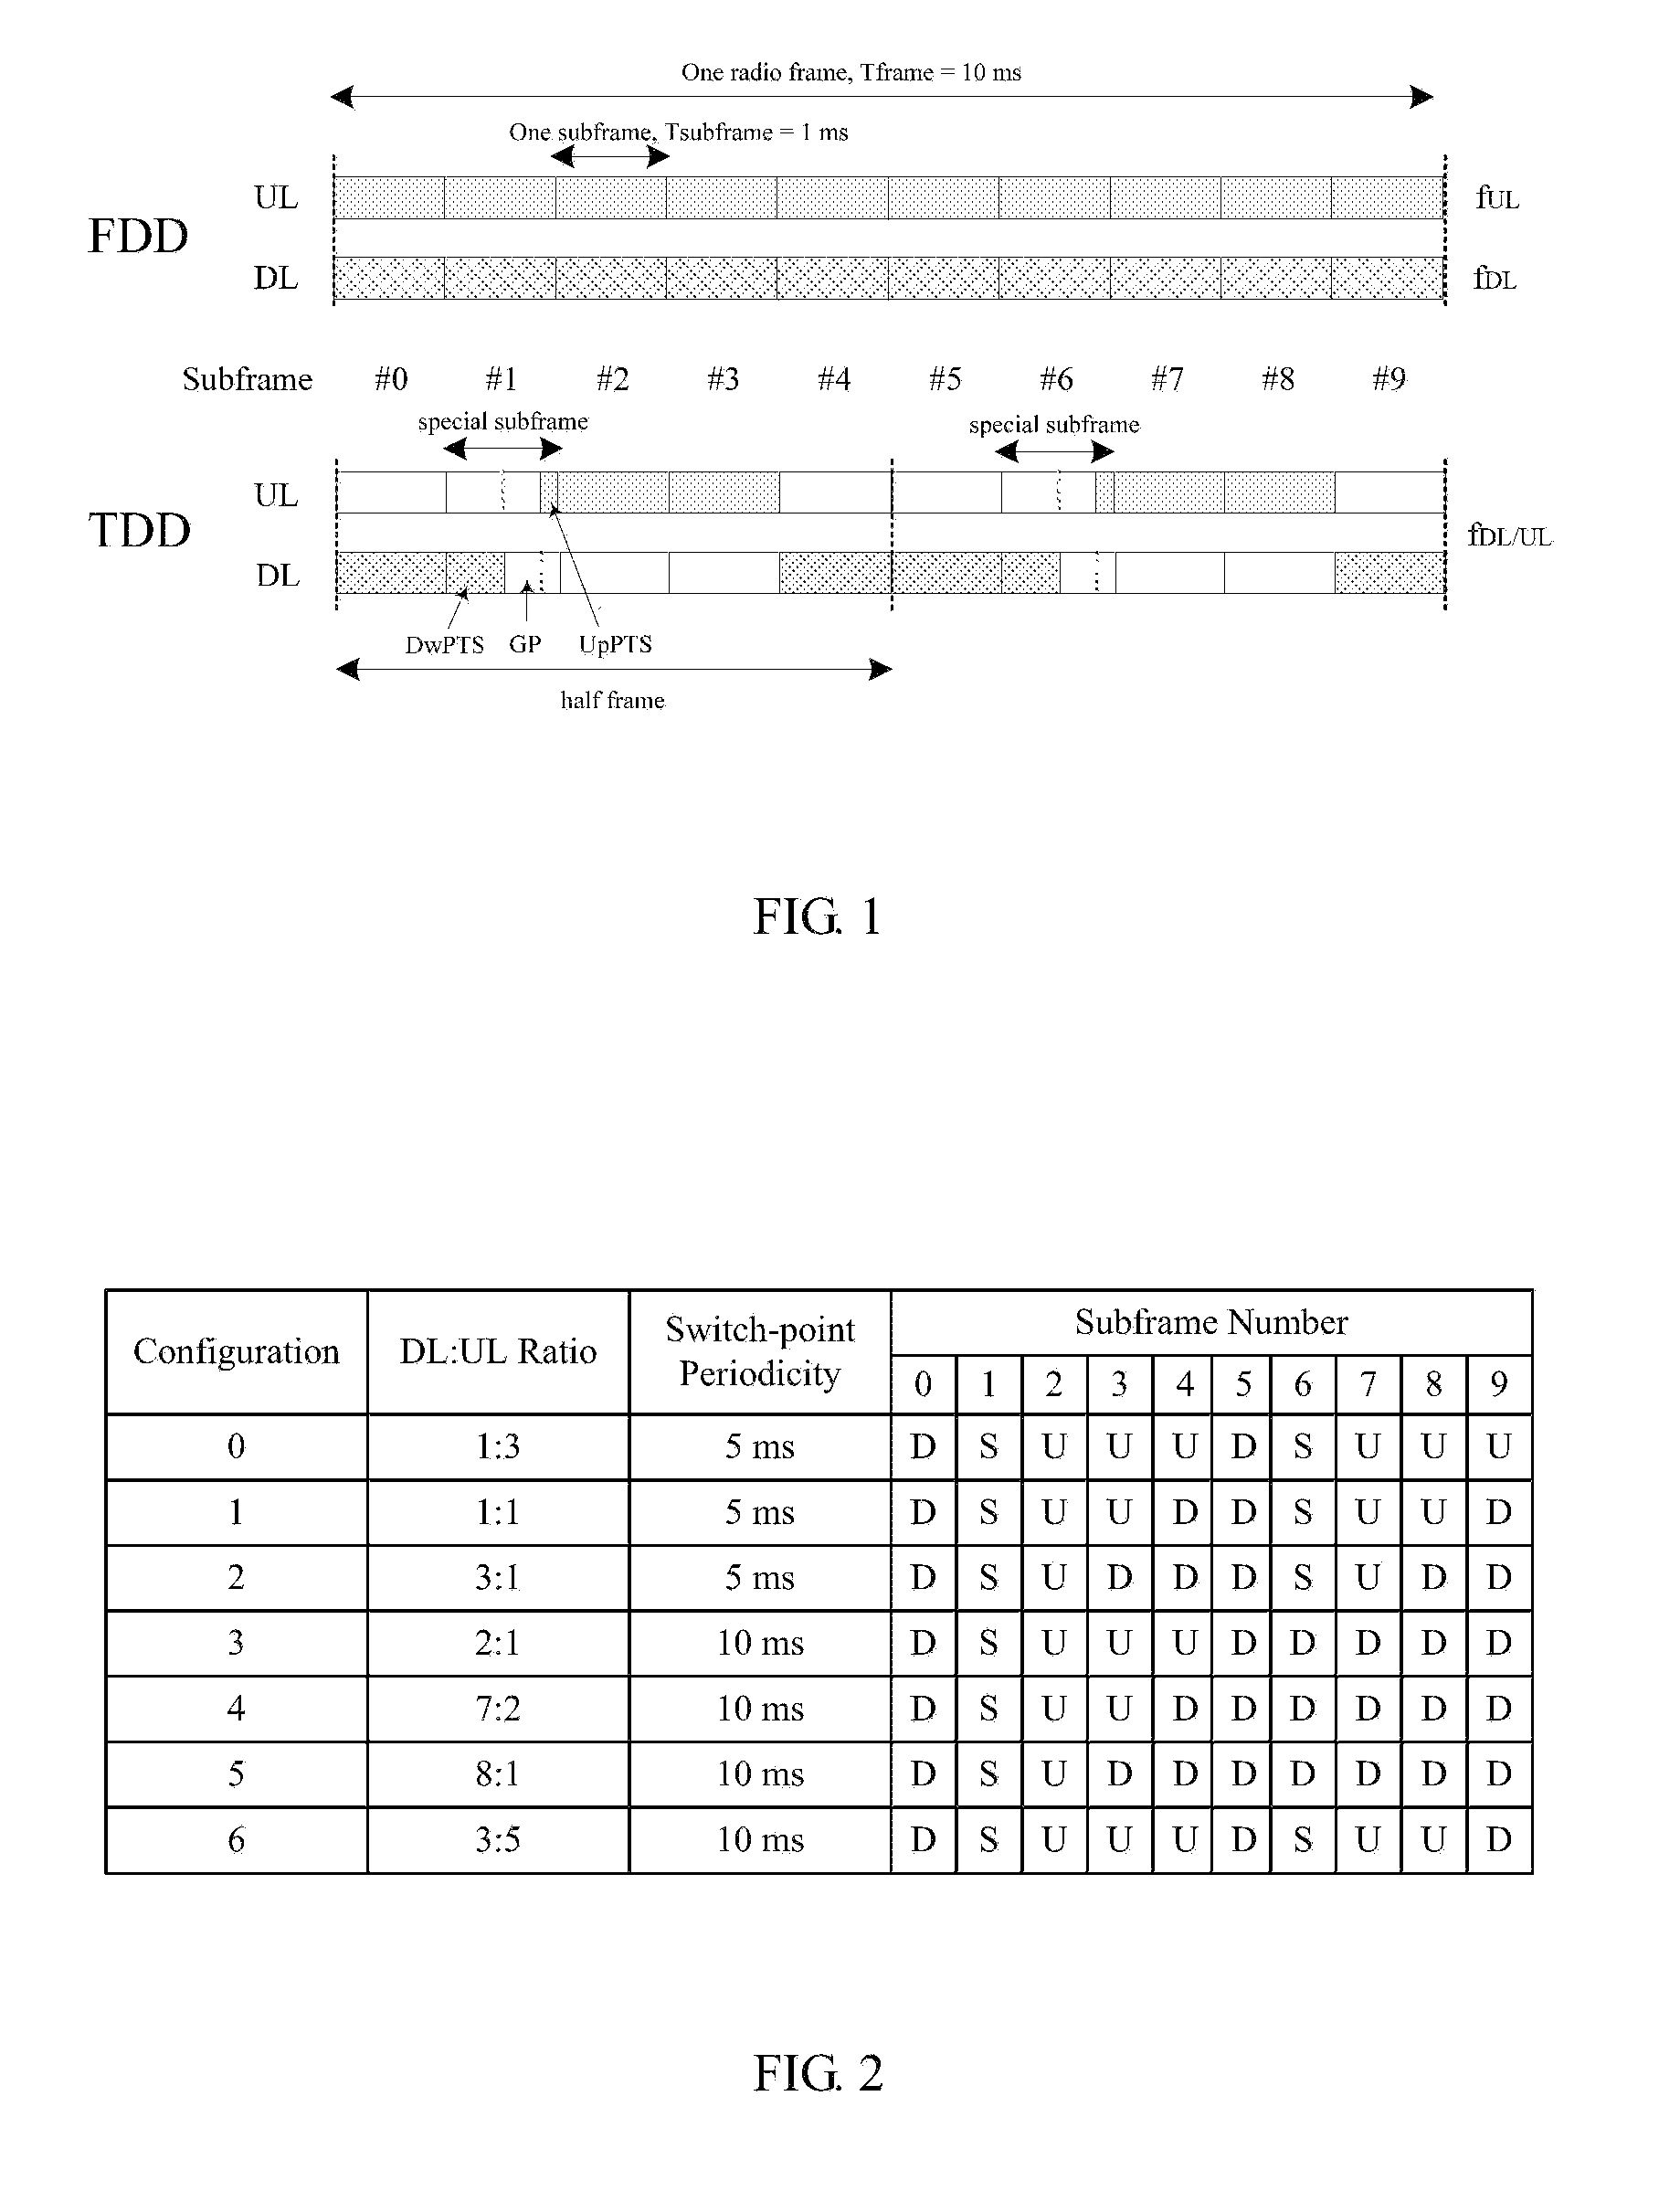 Interference indicator for wireless communication systems